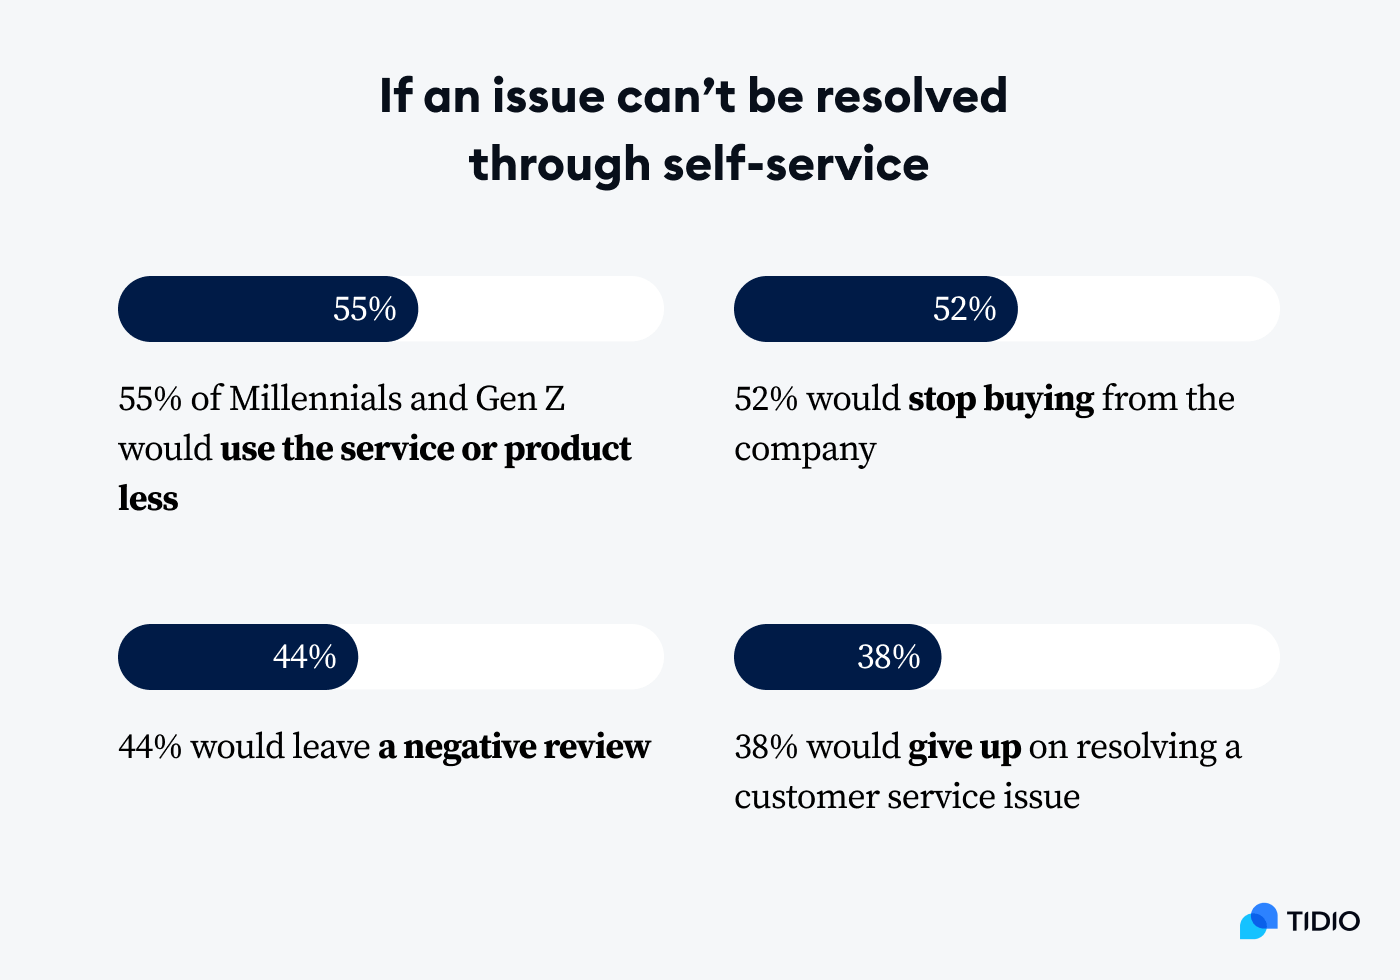 Around 38% of Gen Z and Millennial customers say they’ll give up on resolving a customer service issue if it can't be resolved in self-service